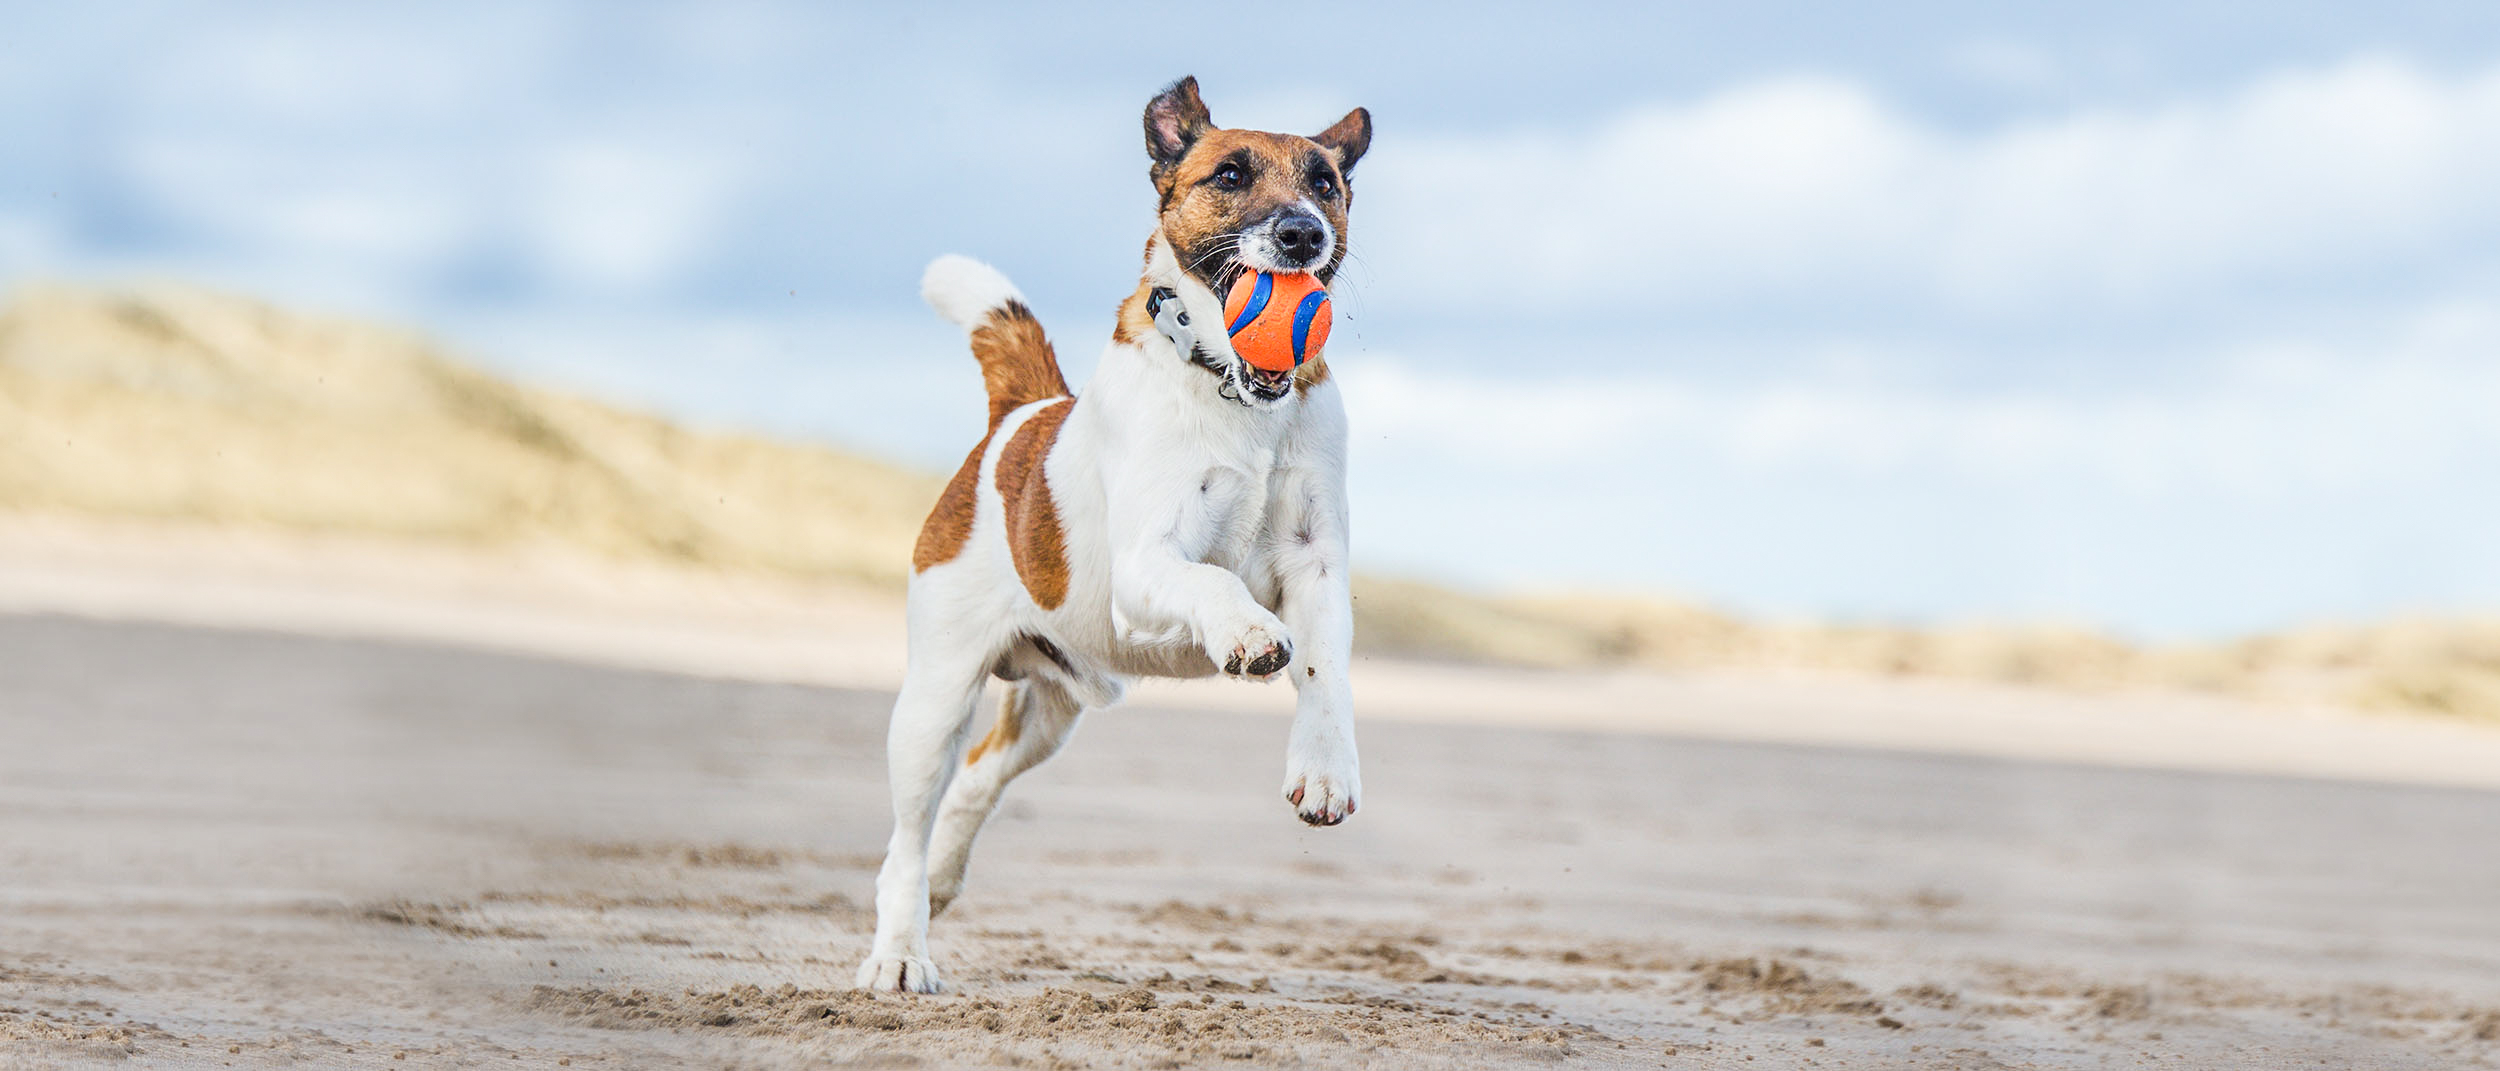 Adult Jack Russell running on a beach with a ball in its mouth.